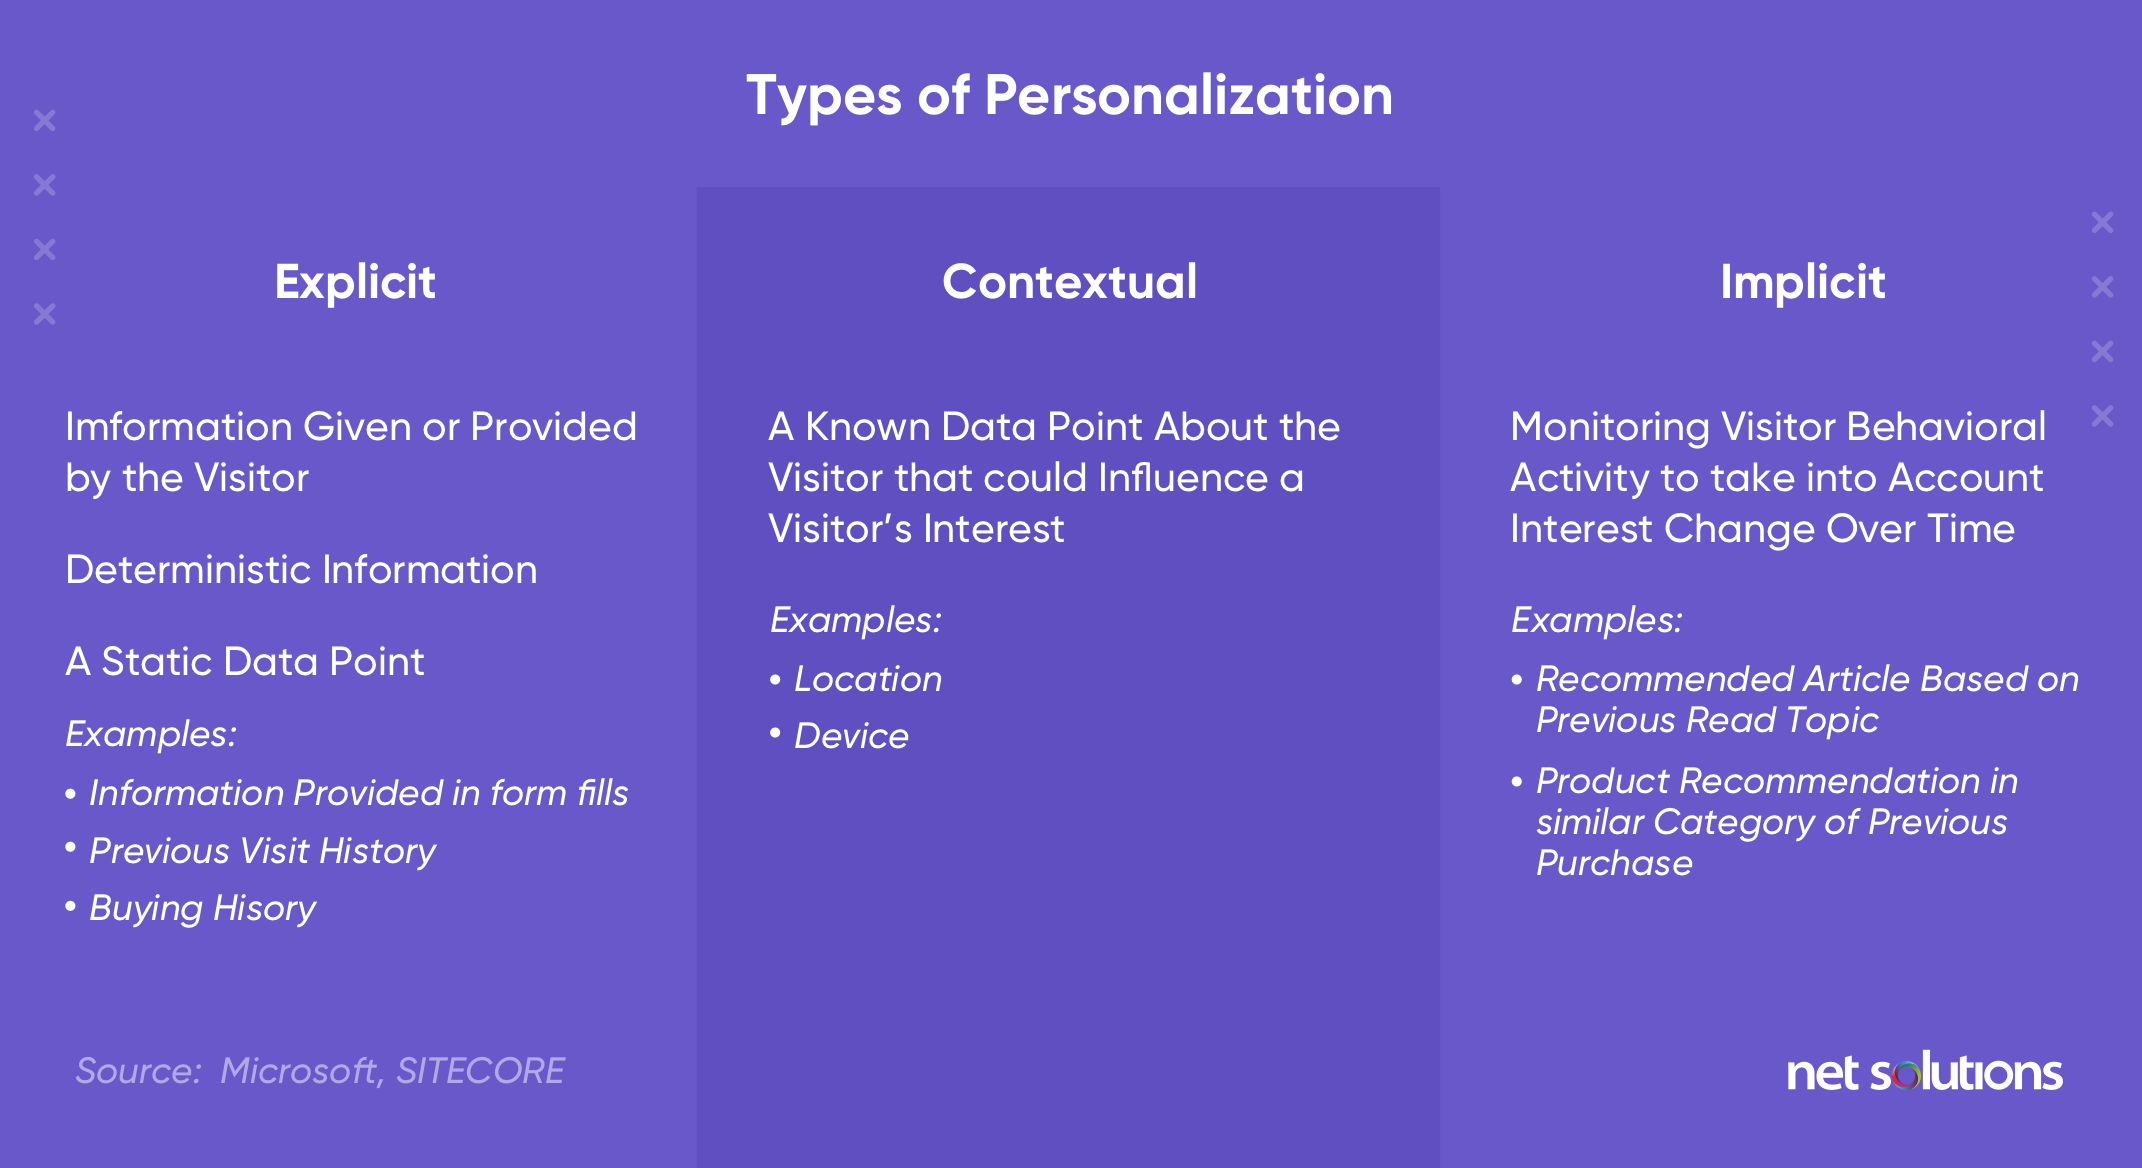 Different types of personalization